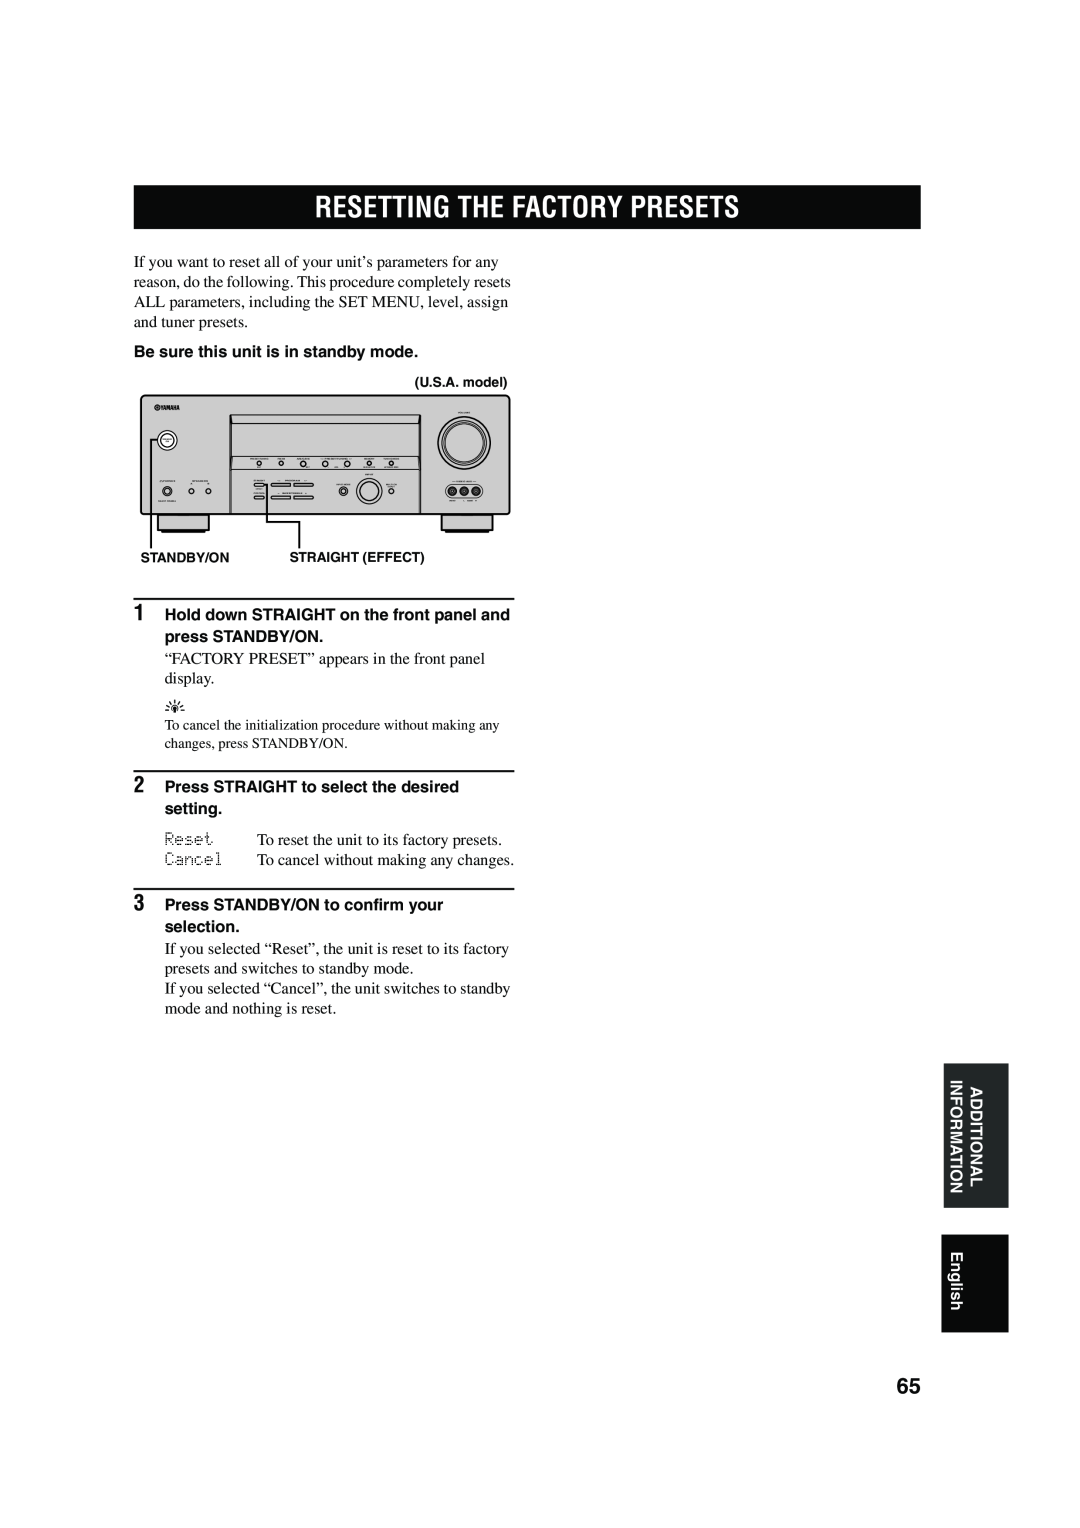 Yamaha RX-V450 owner manual Resetting The Factory Presets, Be sure this unit is in standby mode 